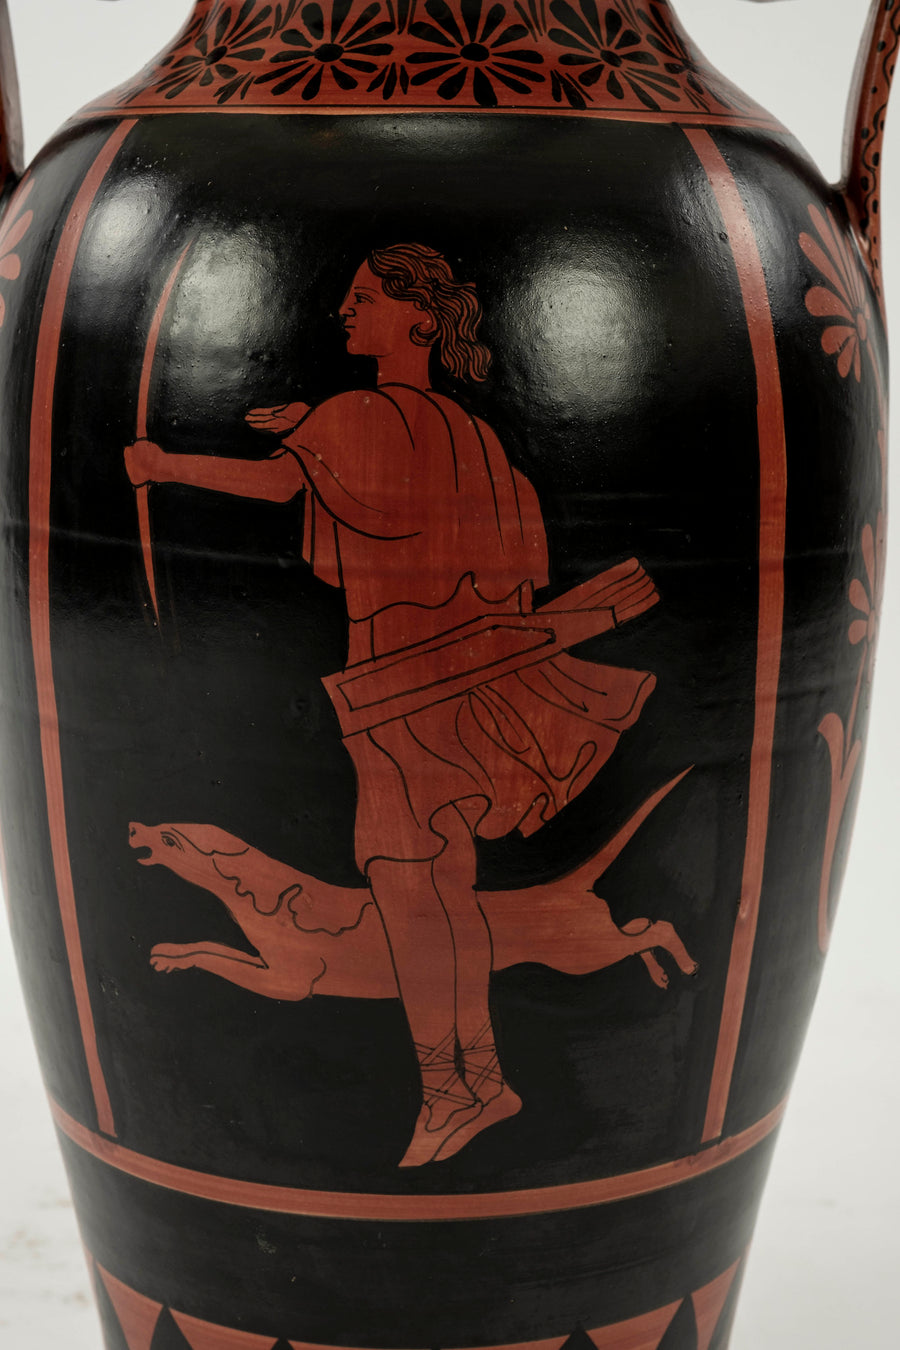 Up-close of the urn lamp's base featuring classic Etruscan artwork of a female archer with hunting dog and painted in classic red on black.